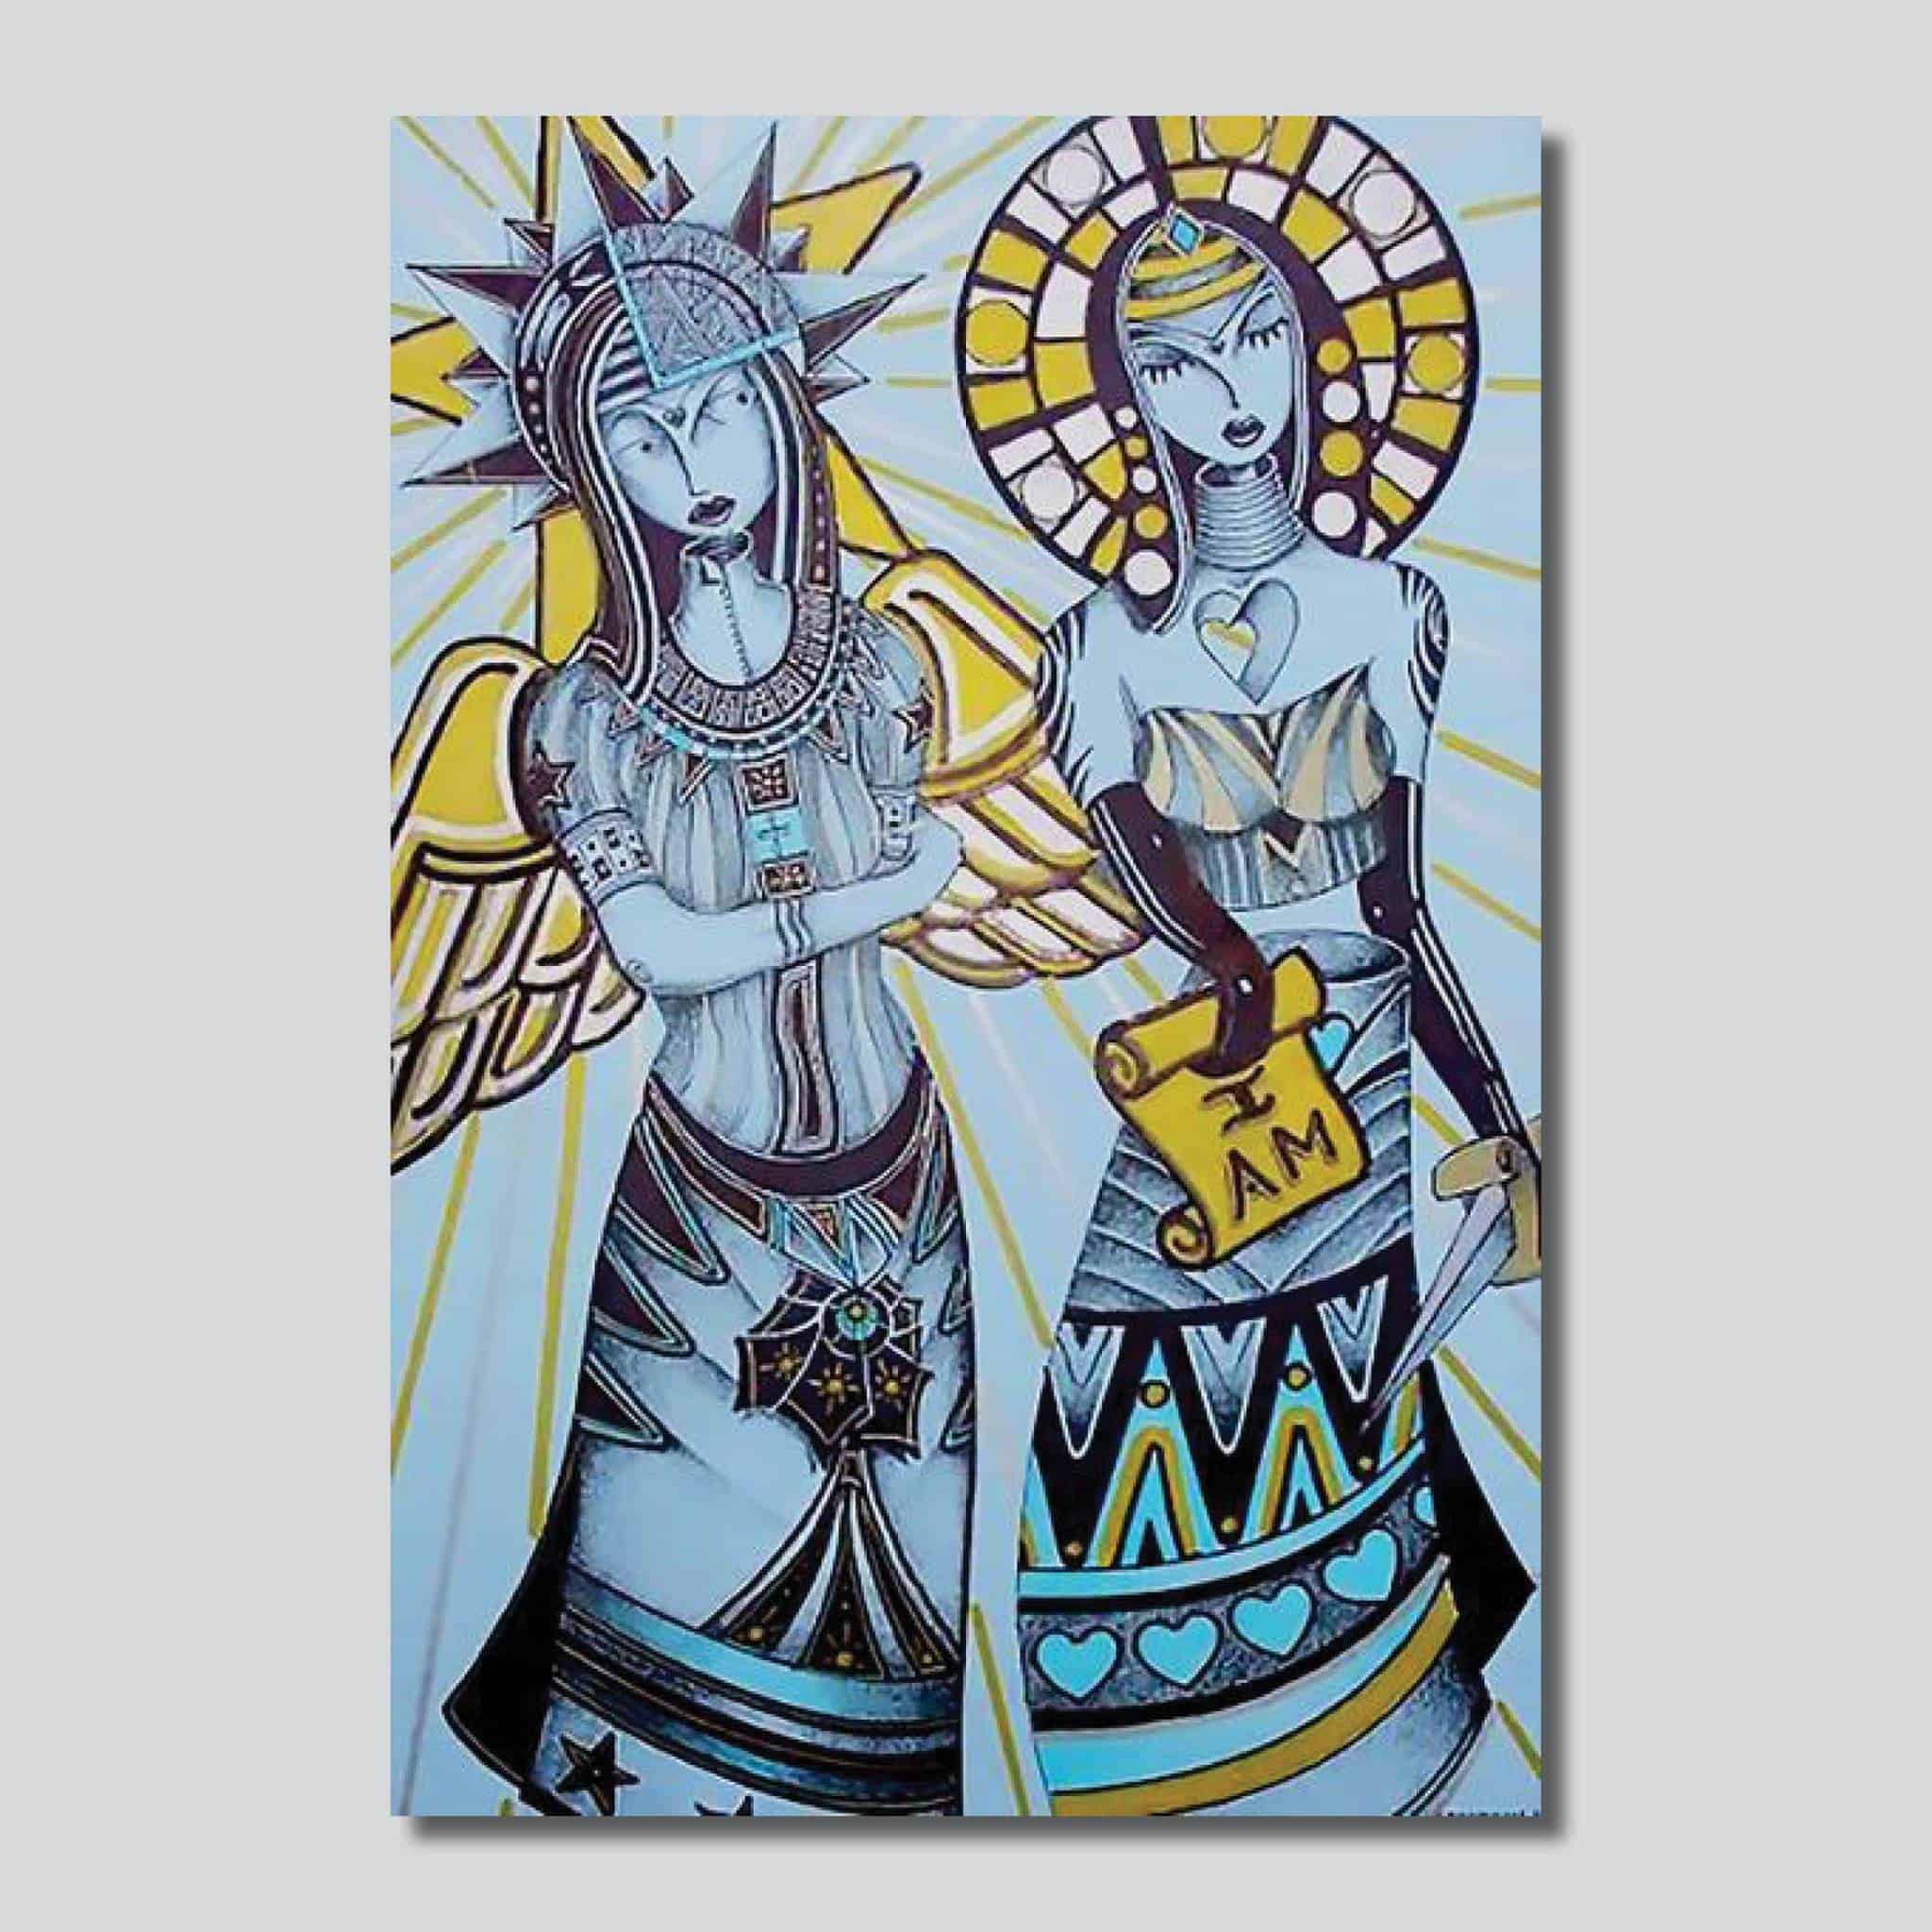 “I AM” Protected By Angels 12″ x 18″ Giclee On High Gloss MetalBy: Ken Caperton